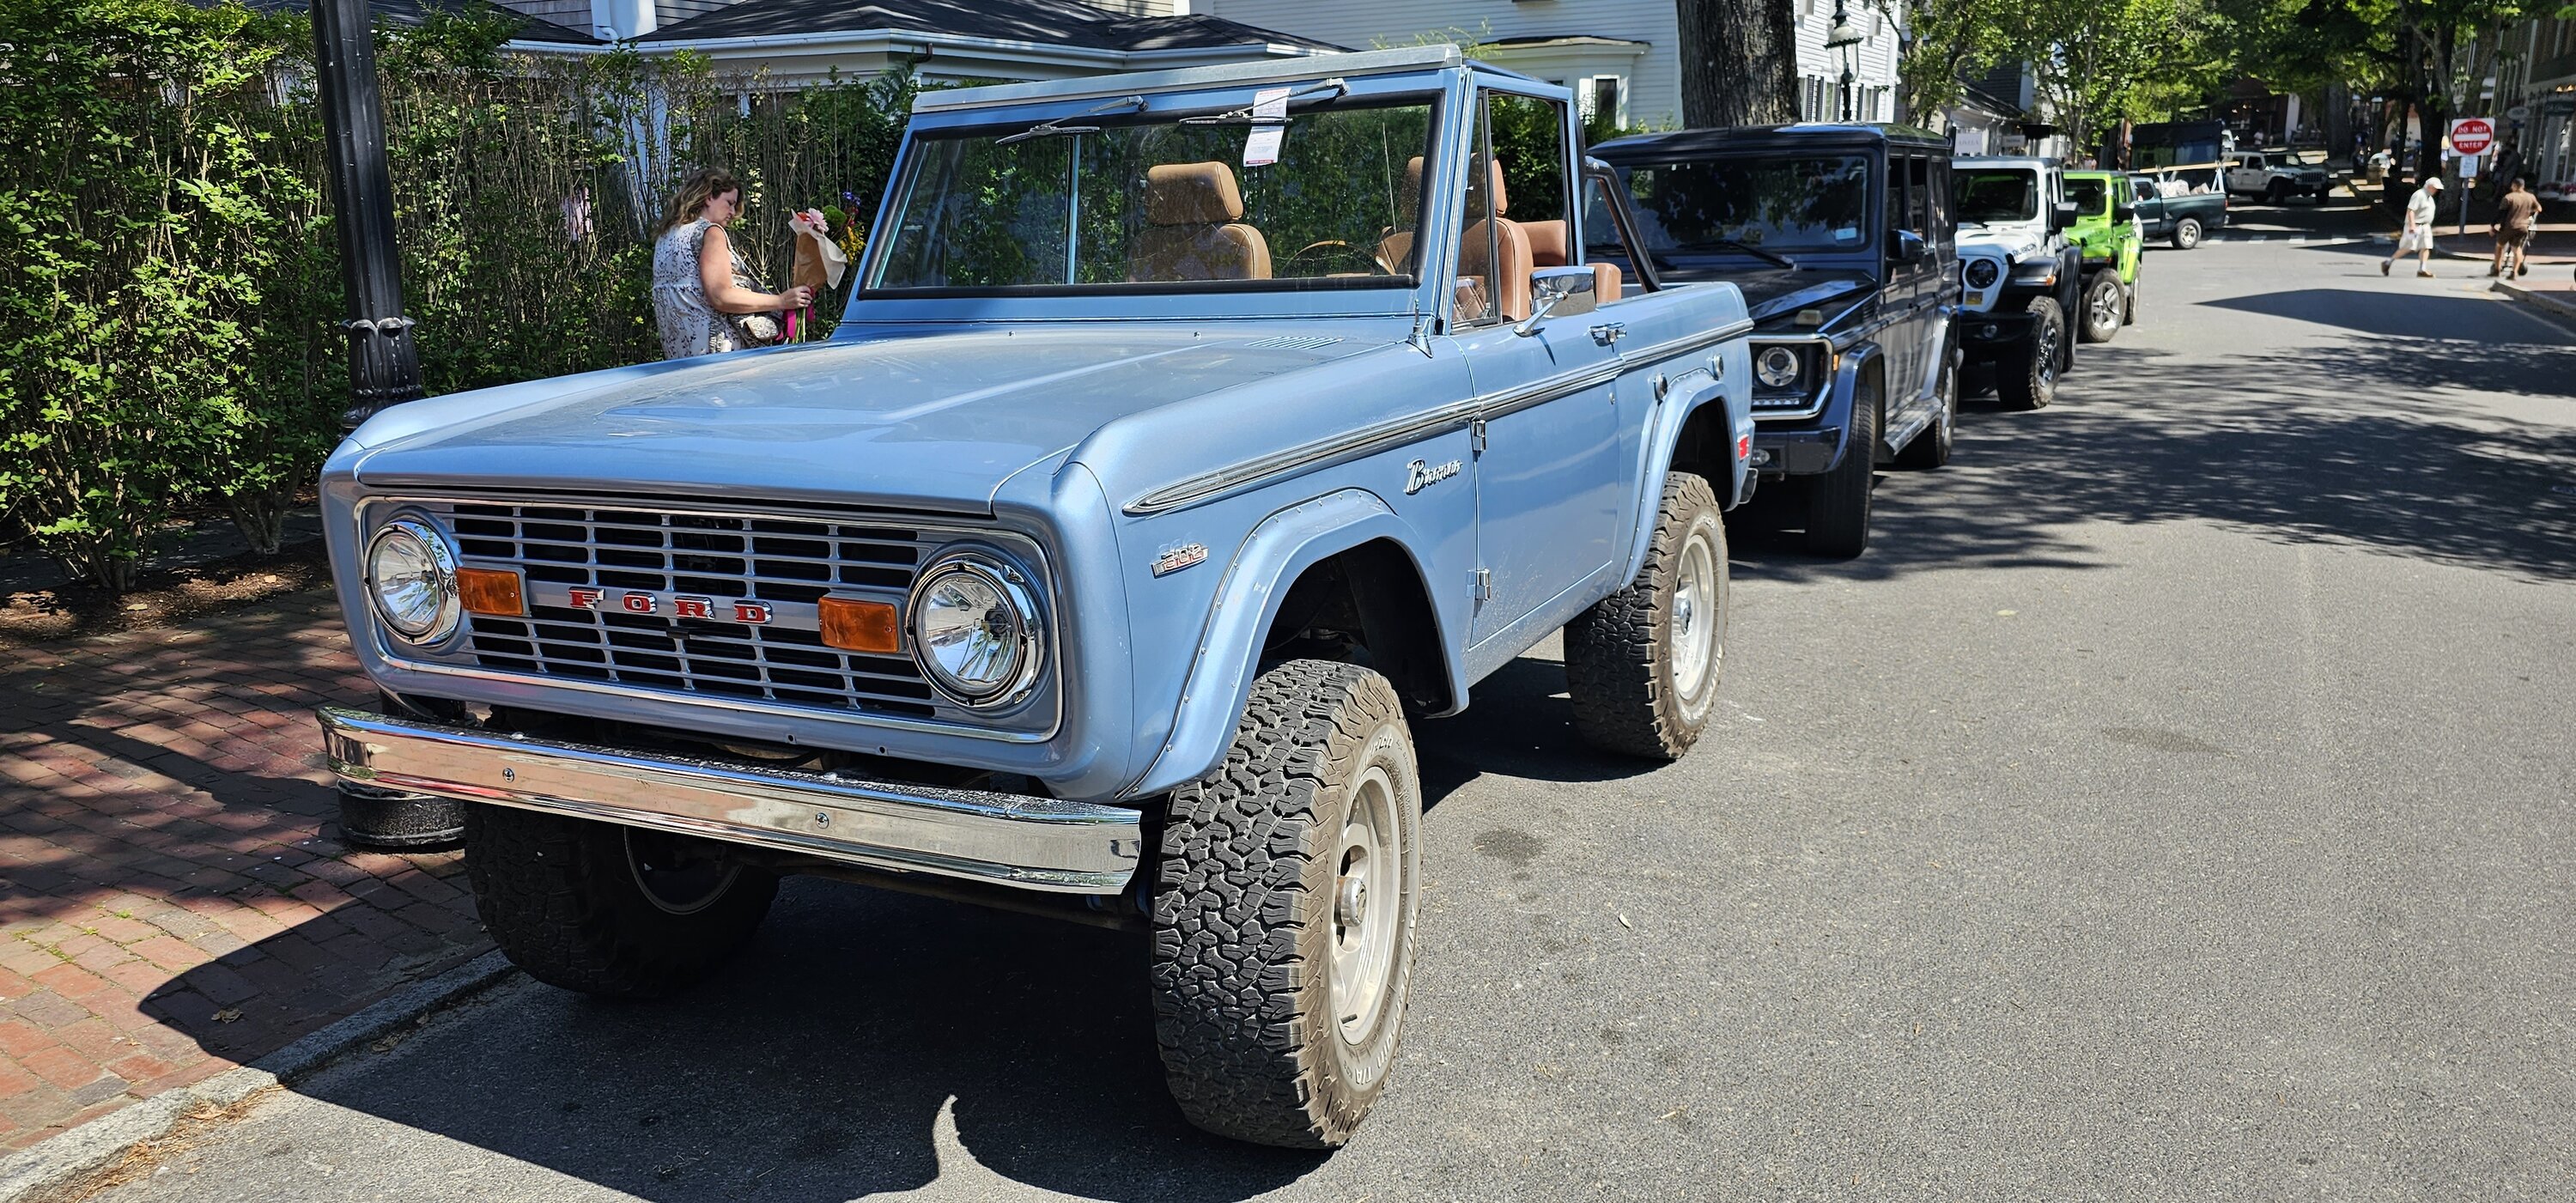 Ford Bronco Throwback Commercial: 1966 Bronco - A Breed Apart 20230725_145148